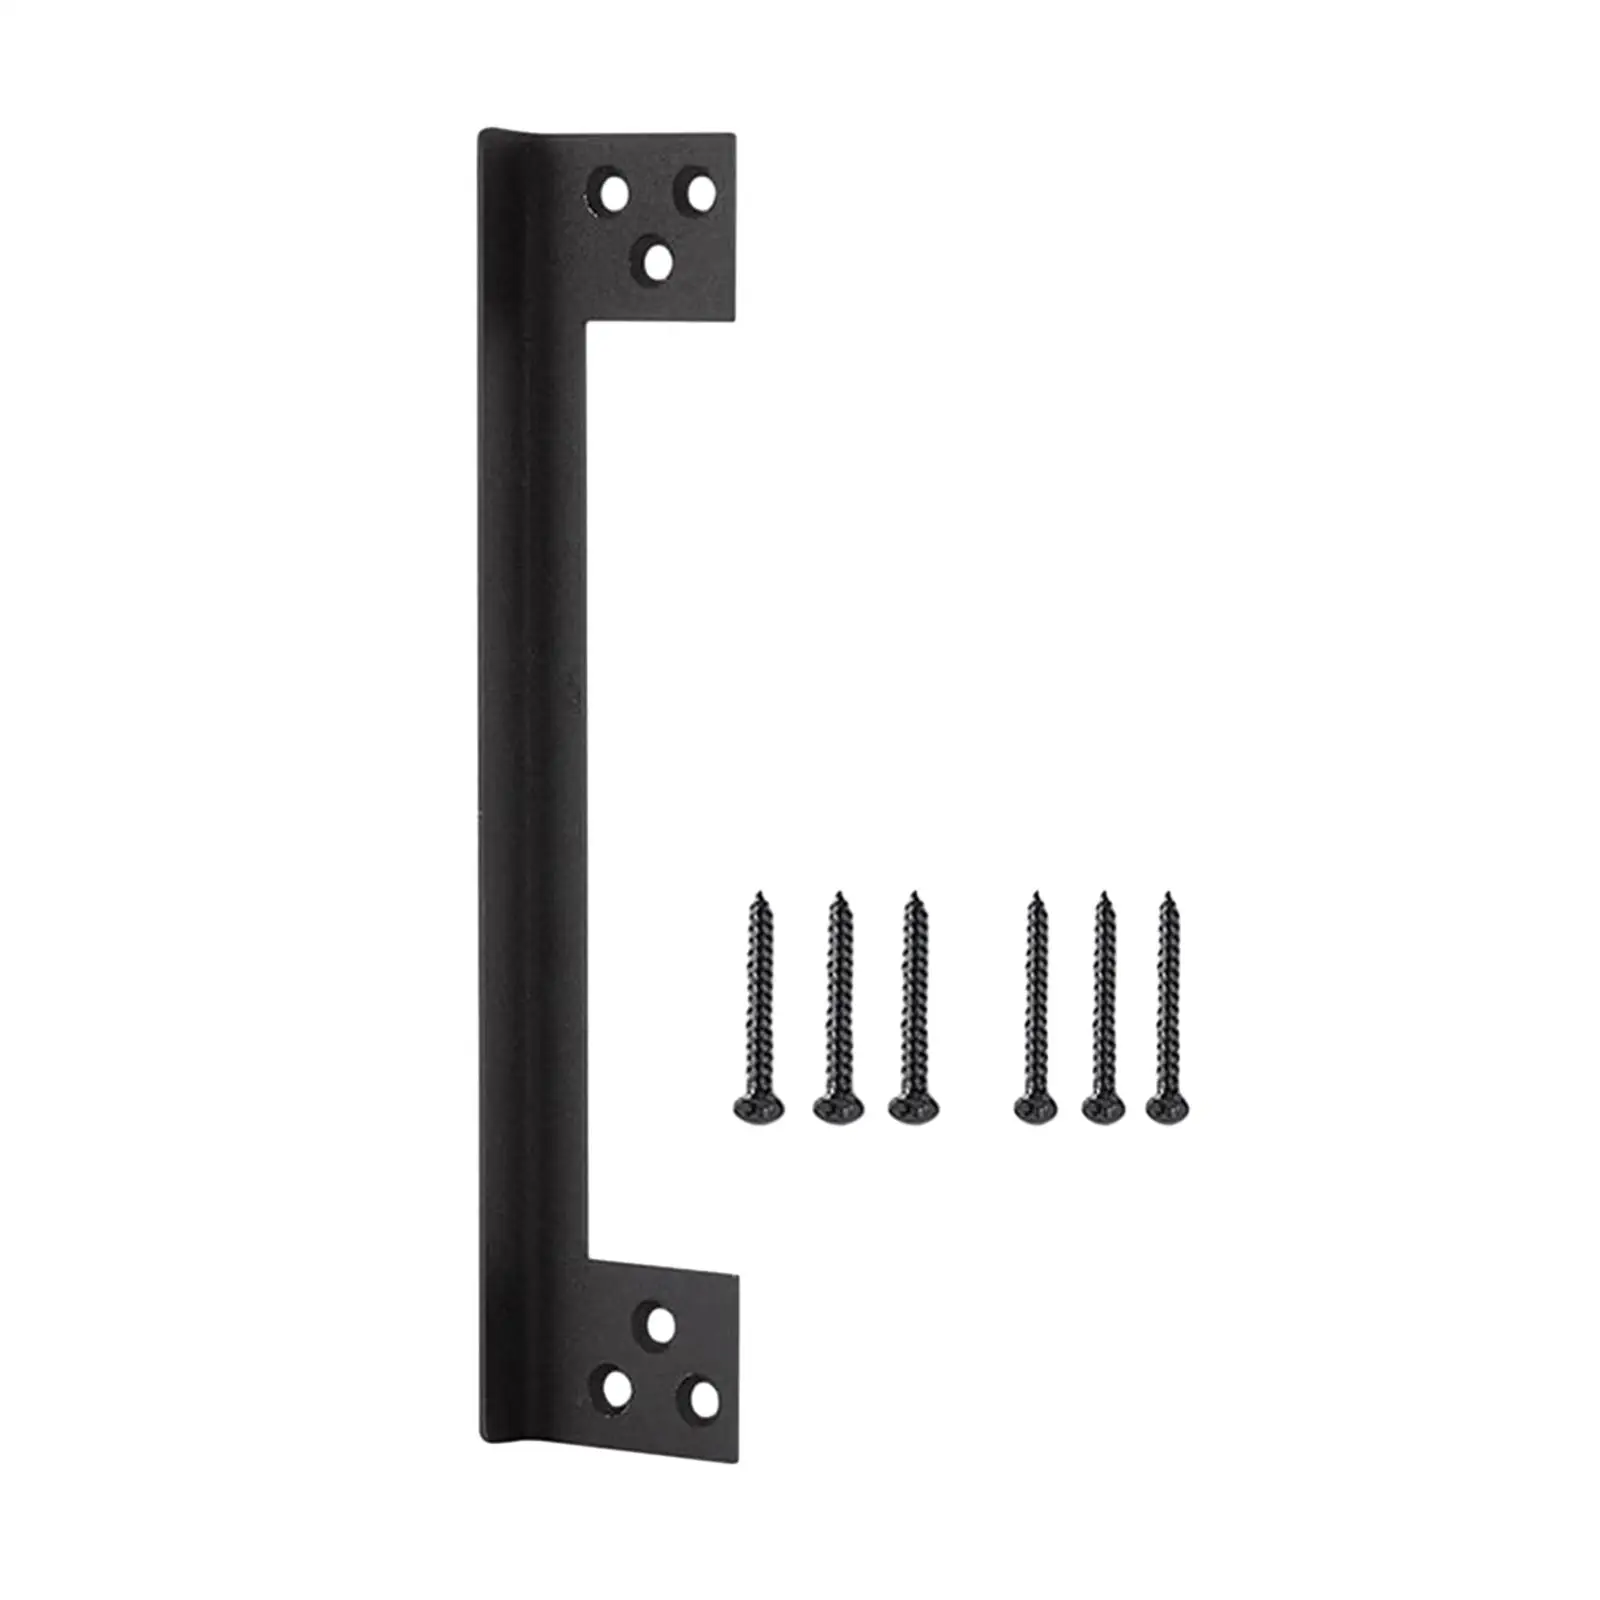 Door Latch Guard Plate Cover Metal Hardware Latch Safety Protector Rustproof with Mounting Screws Door Latch Protective Cover